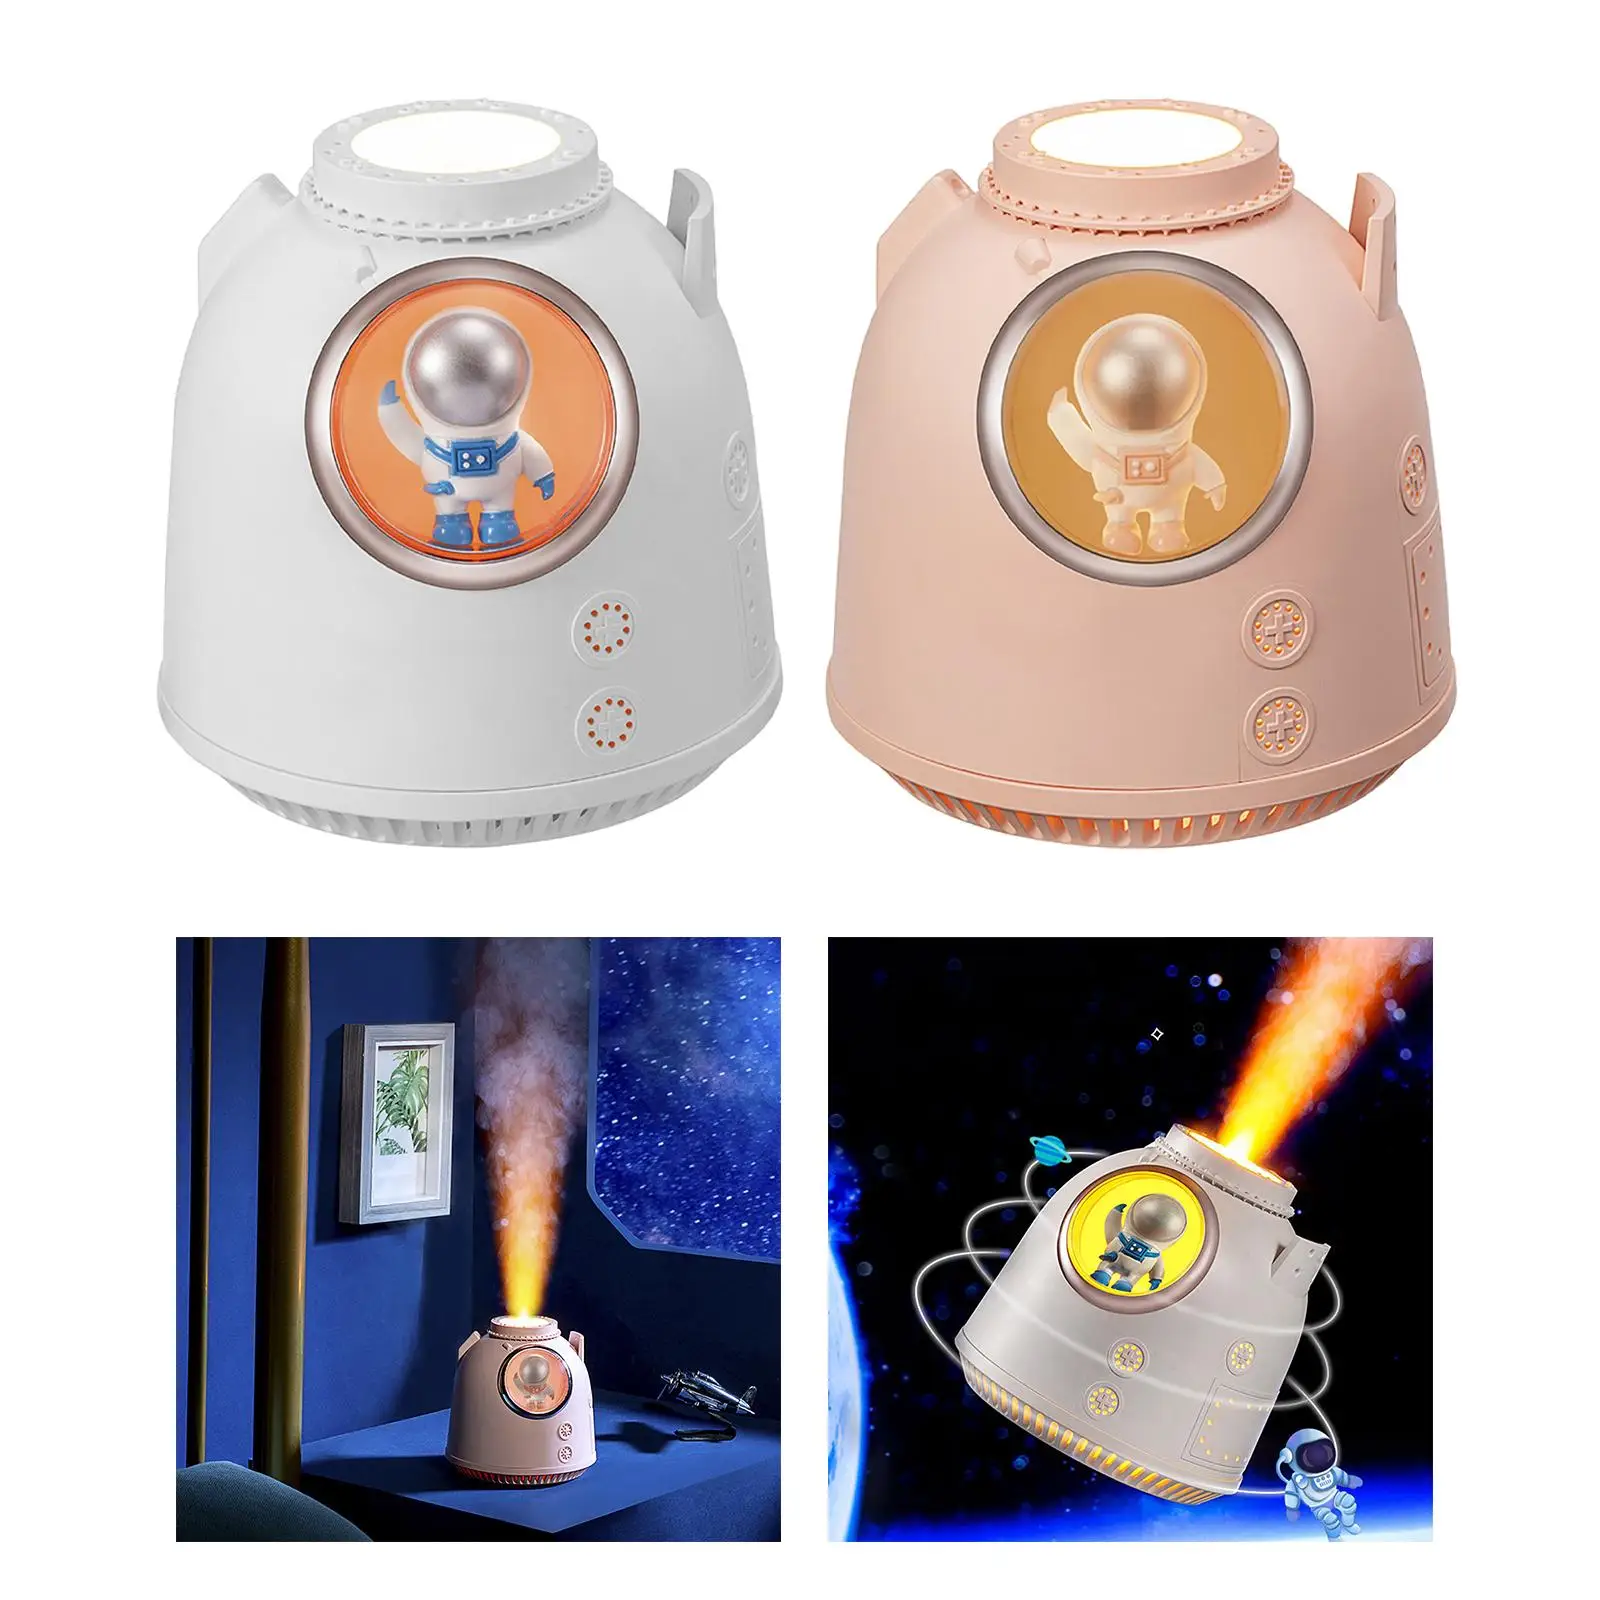 Mini 260ml Air Humidifier USB Charging Space Man Night Light Astronaut Figurines for Tabletop Office Dorm Indoor Bedside